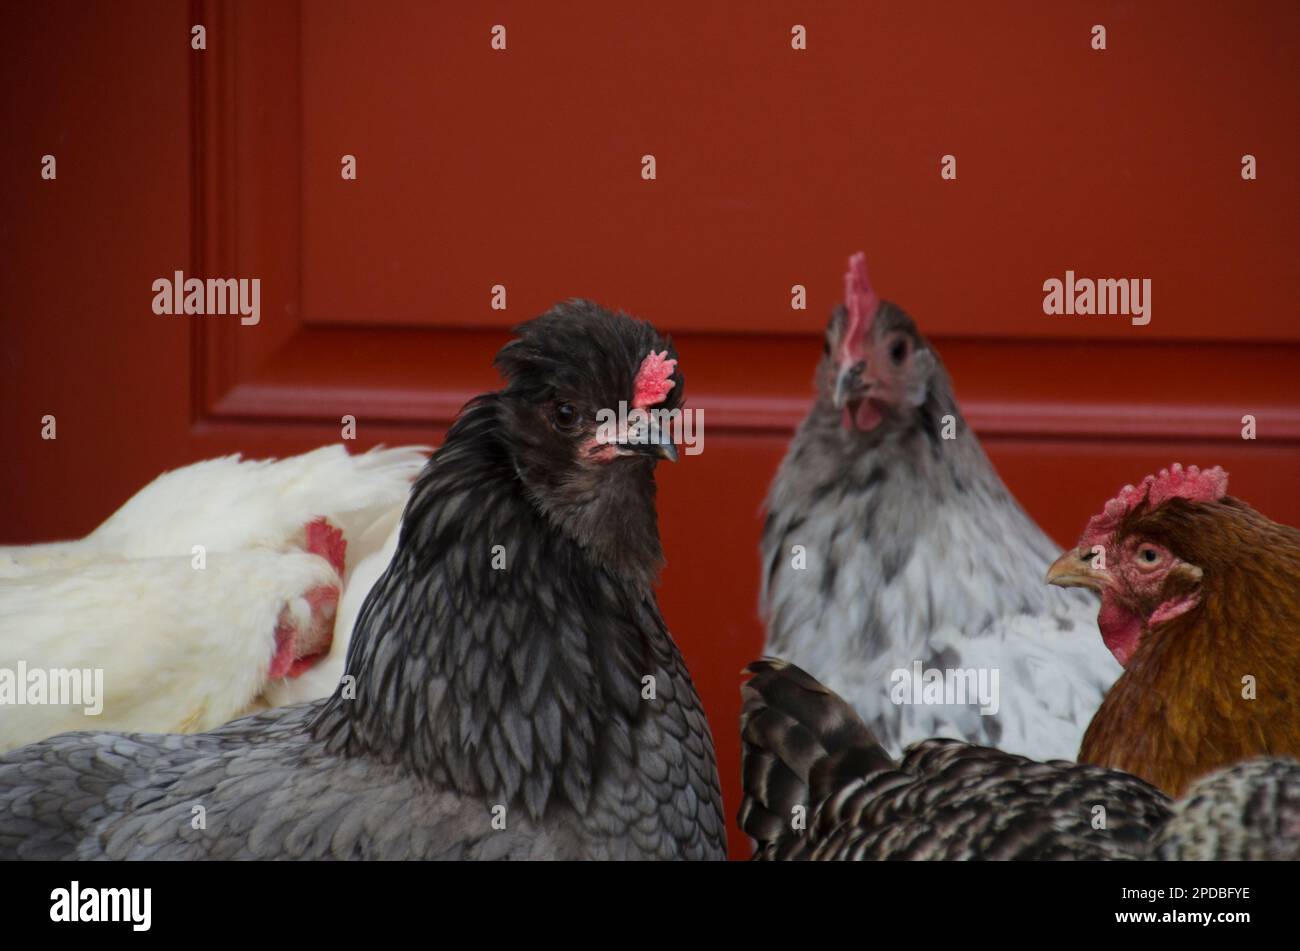 Blue young adult Brahma chicken standing side ways, looking